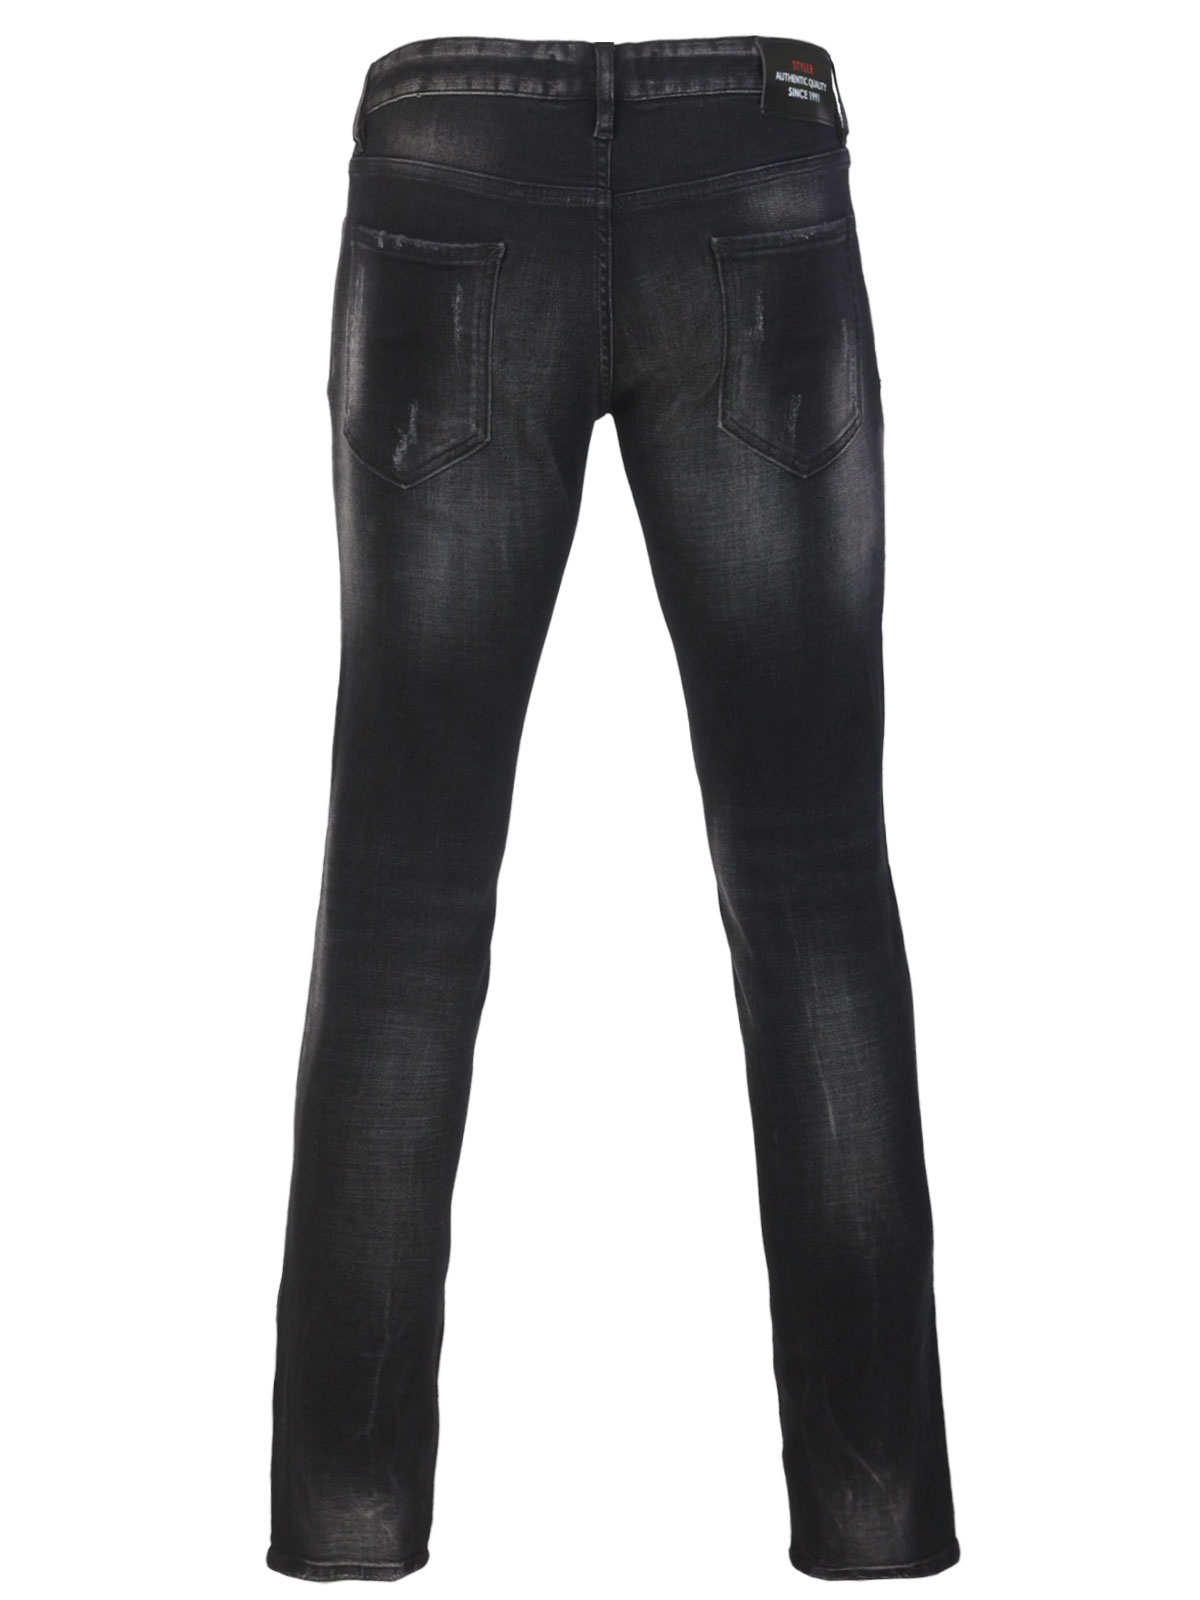 Mens jeans in black with a ripped effect - 62175 € 78.18 img2